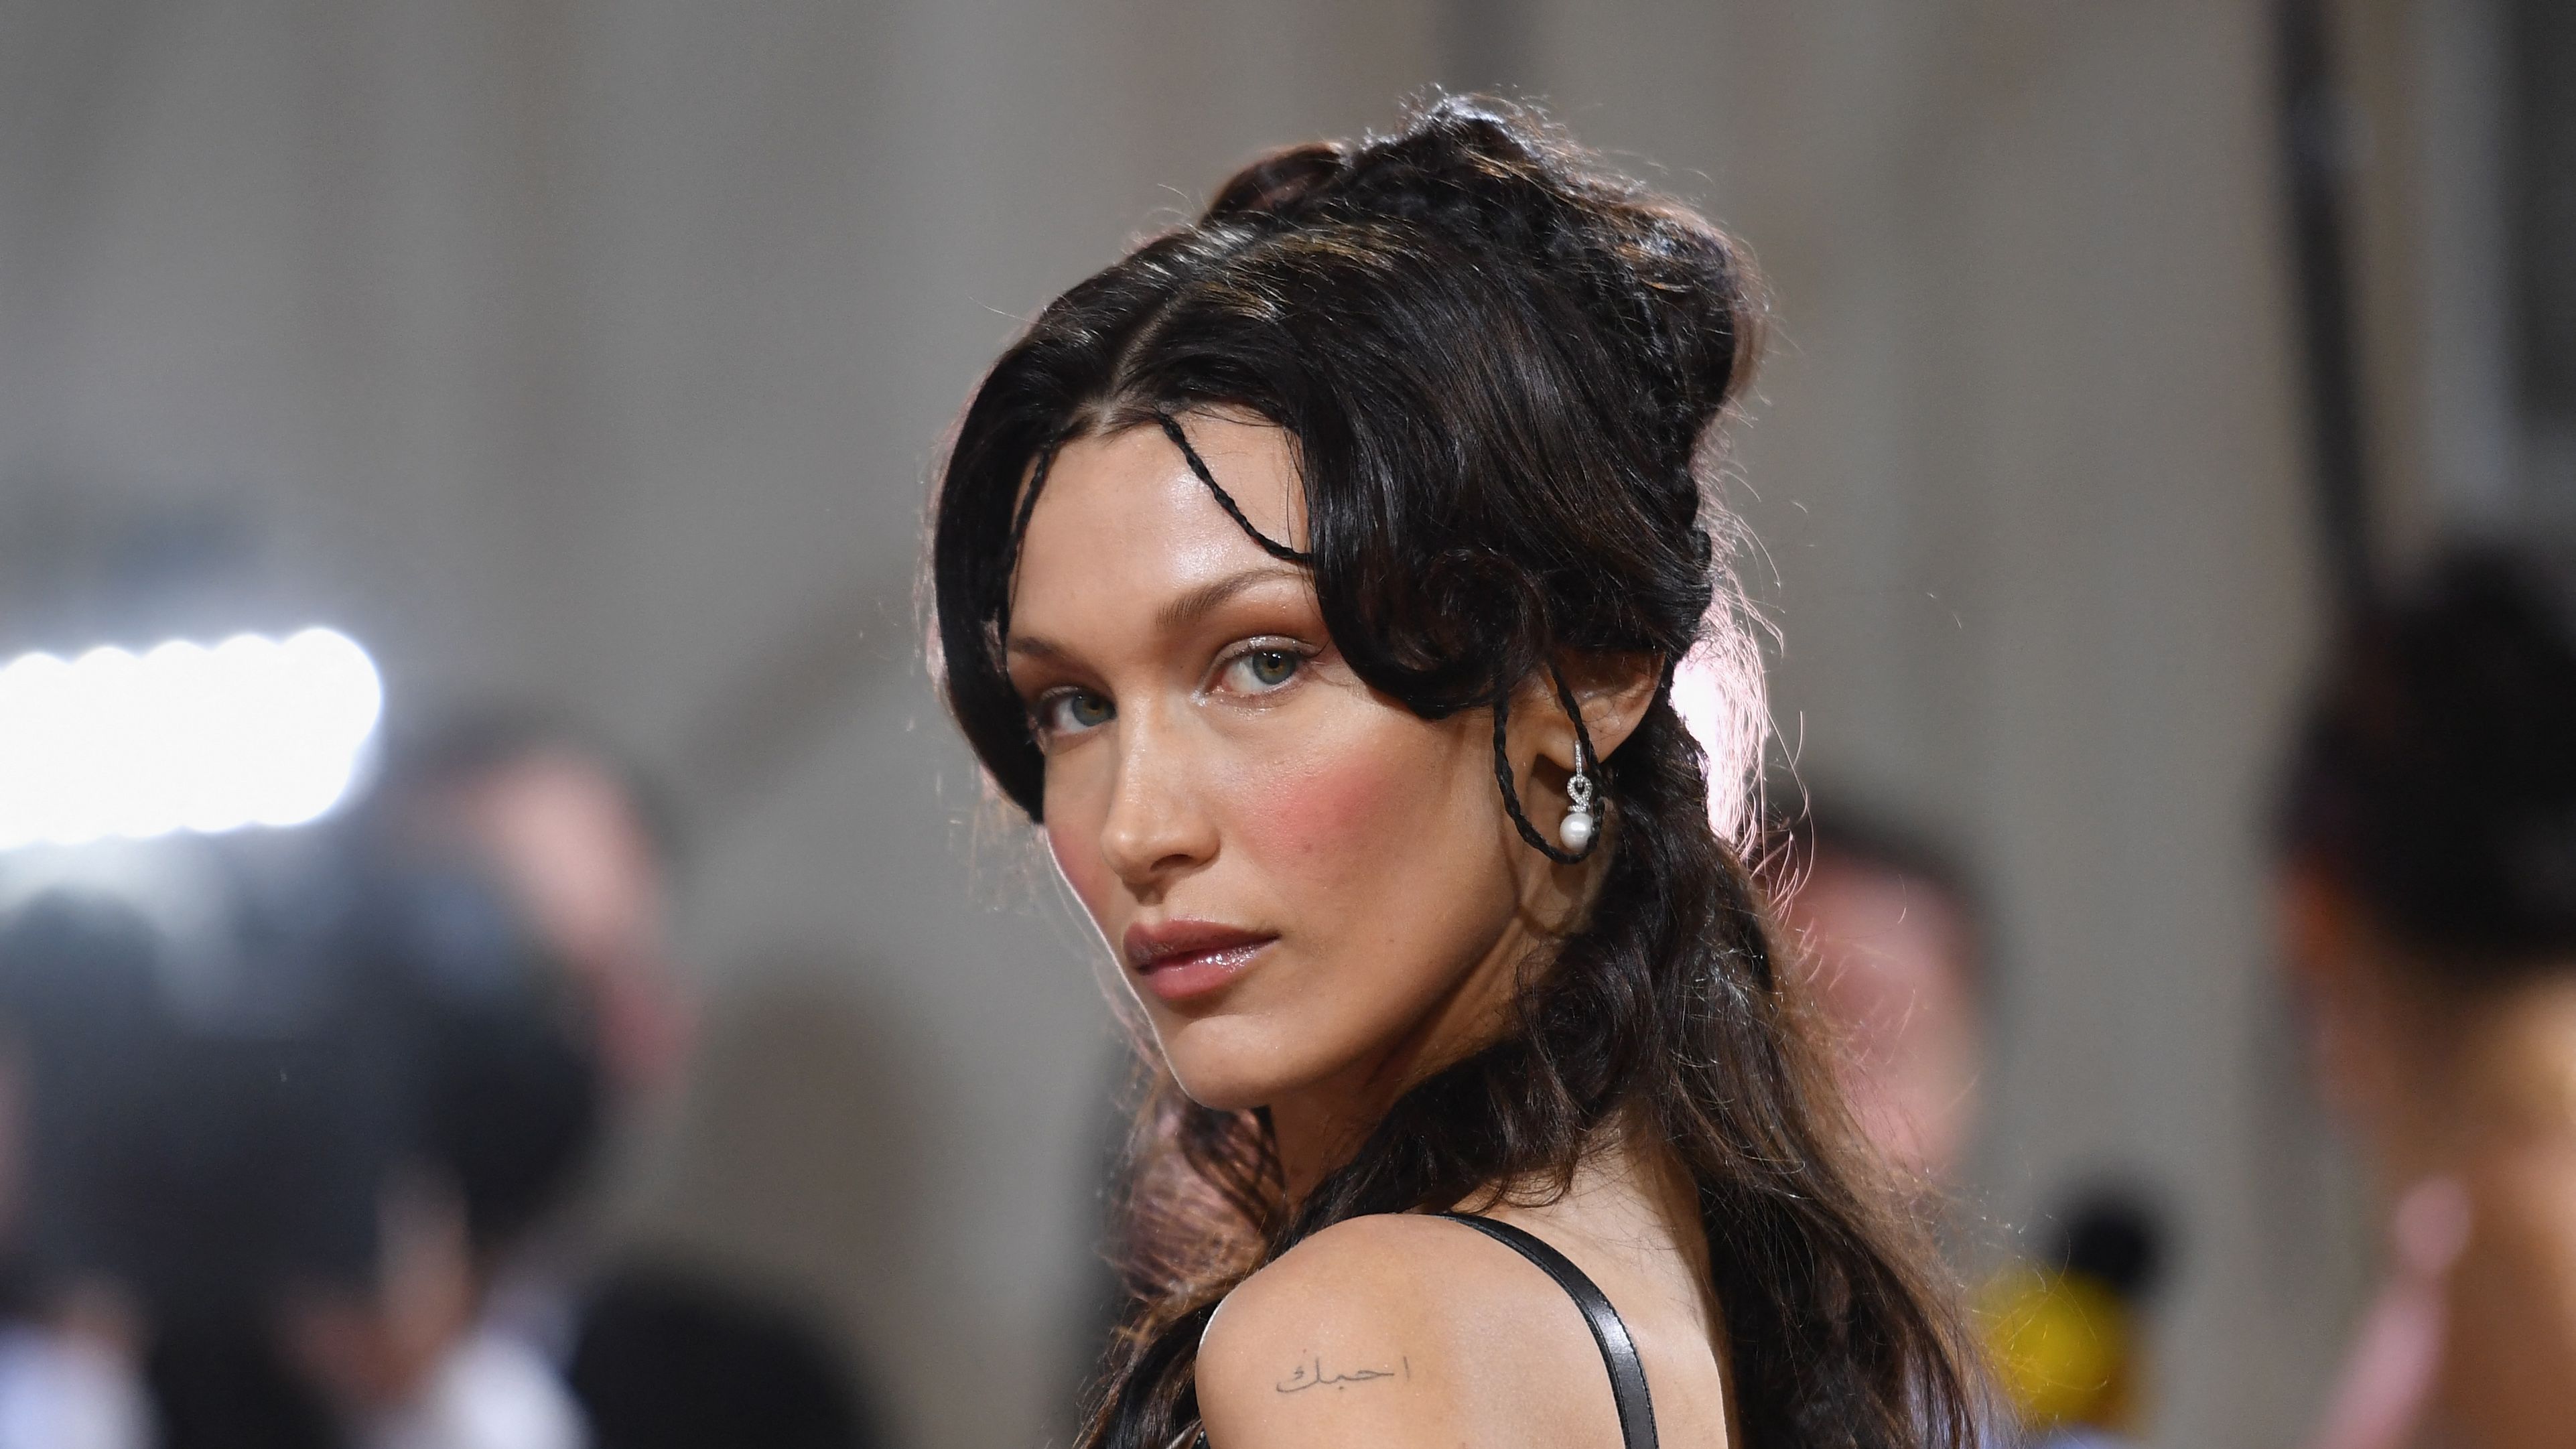 https://hips.hearstapps.com/hmg-prod/images/model-bella-hadid-arrives-for-the-2022-met-gala-at-the-news-photo-1682995651.jpg?crop=1xw:0.78165xh;center,top